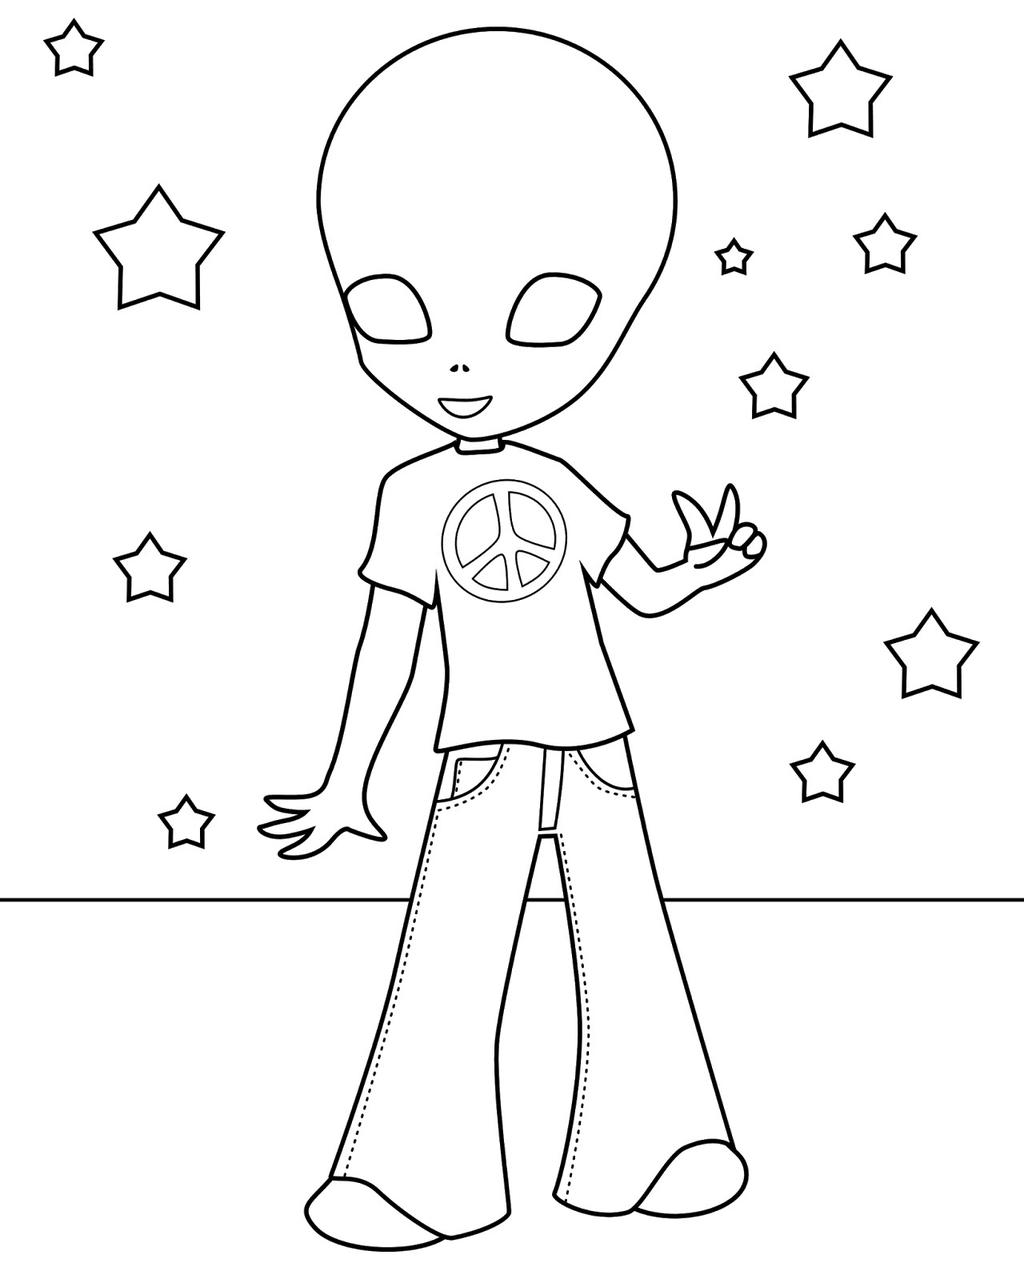 Free Simple Alien Coloring Pages printable